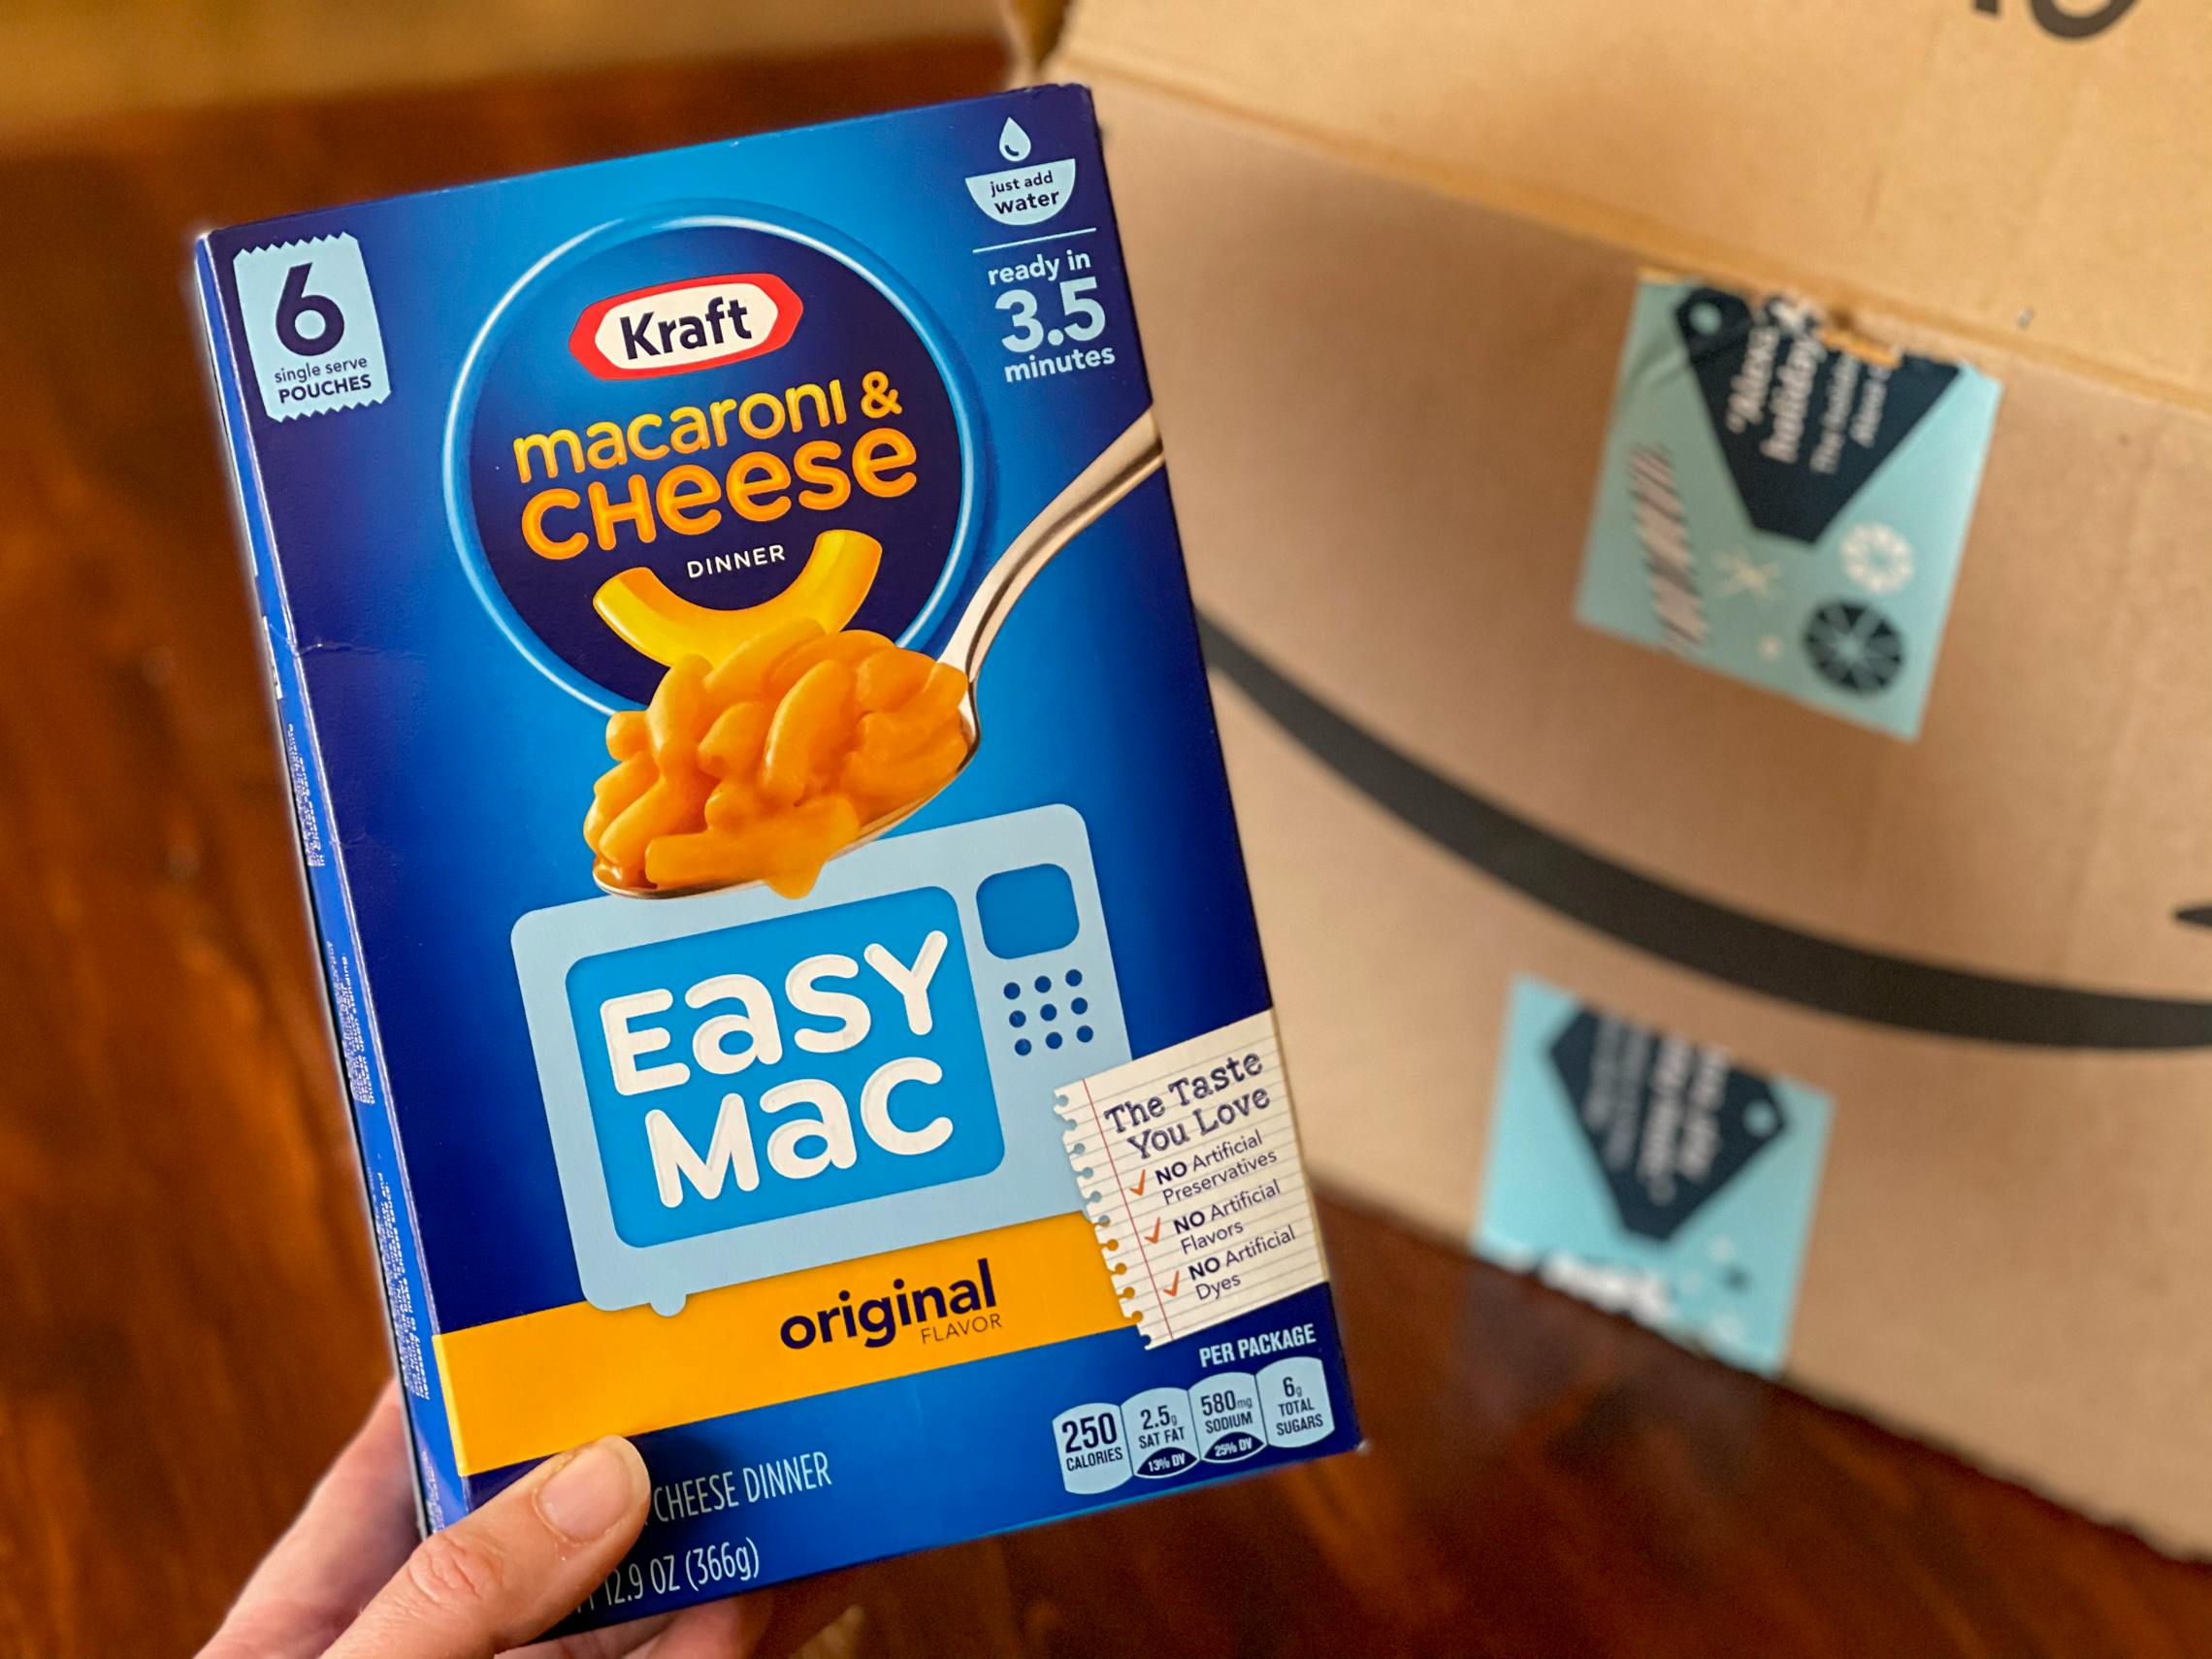 A person holding a box of Macaroni & Cheese Easy Mac in front of an Amazon box.